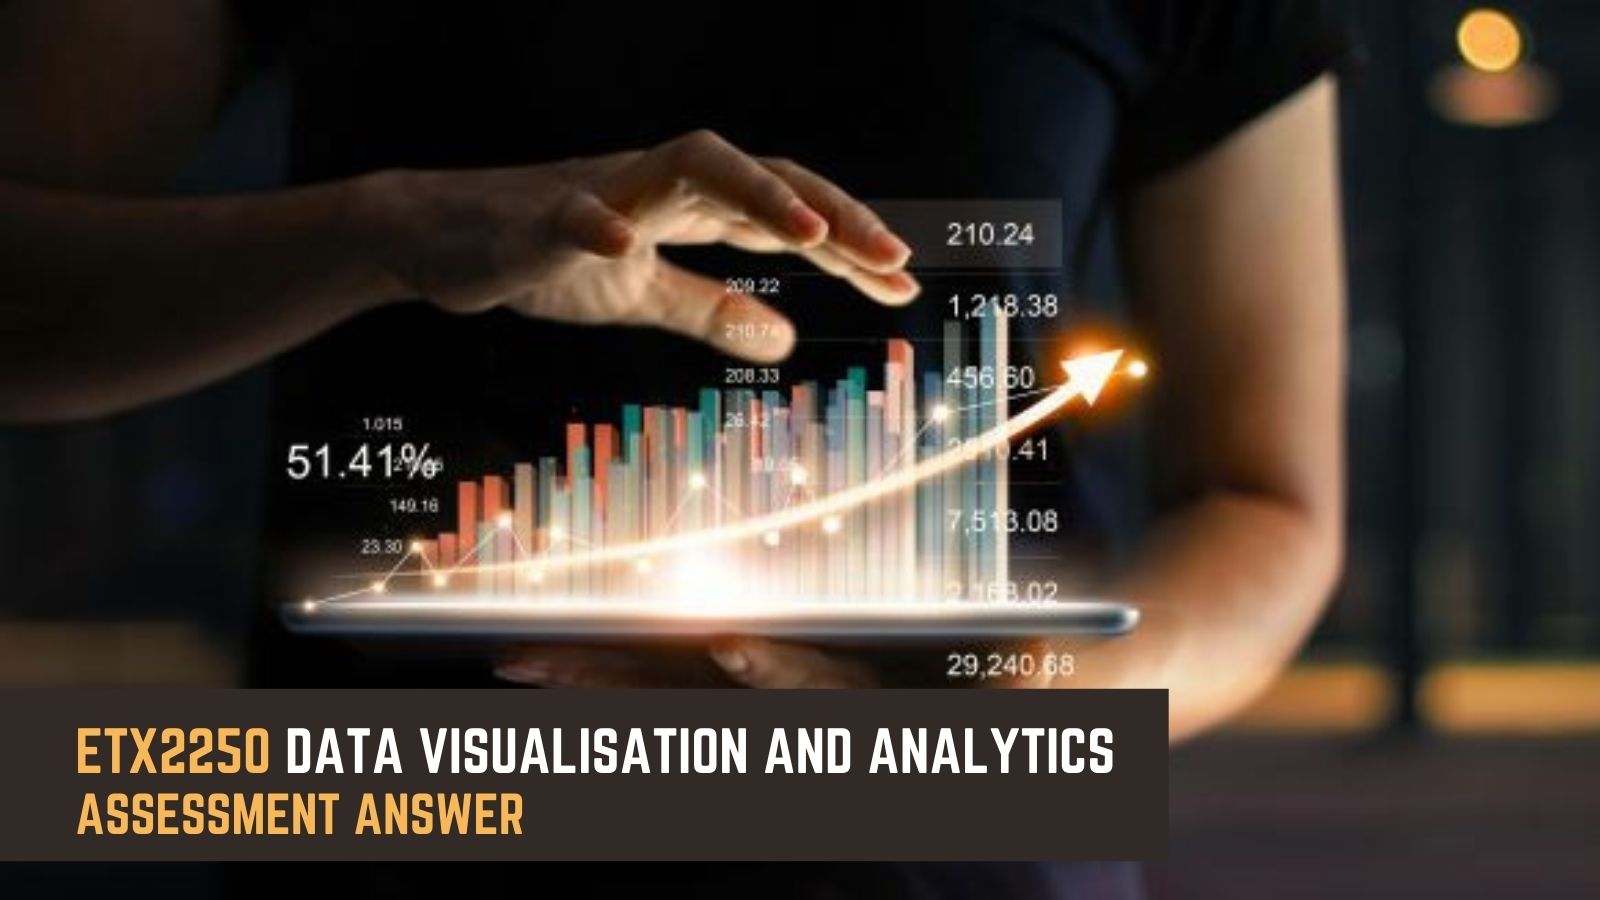 Get ETX2250 Data Visualisation And Analytics Assessment Answer